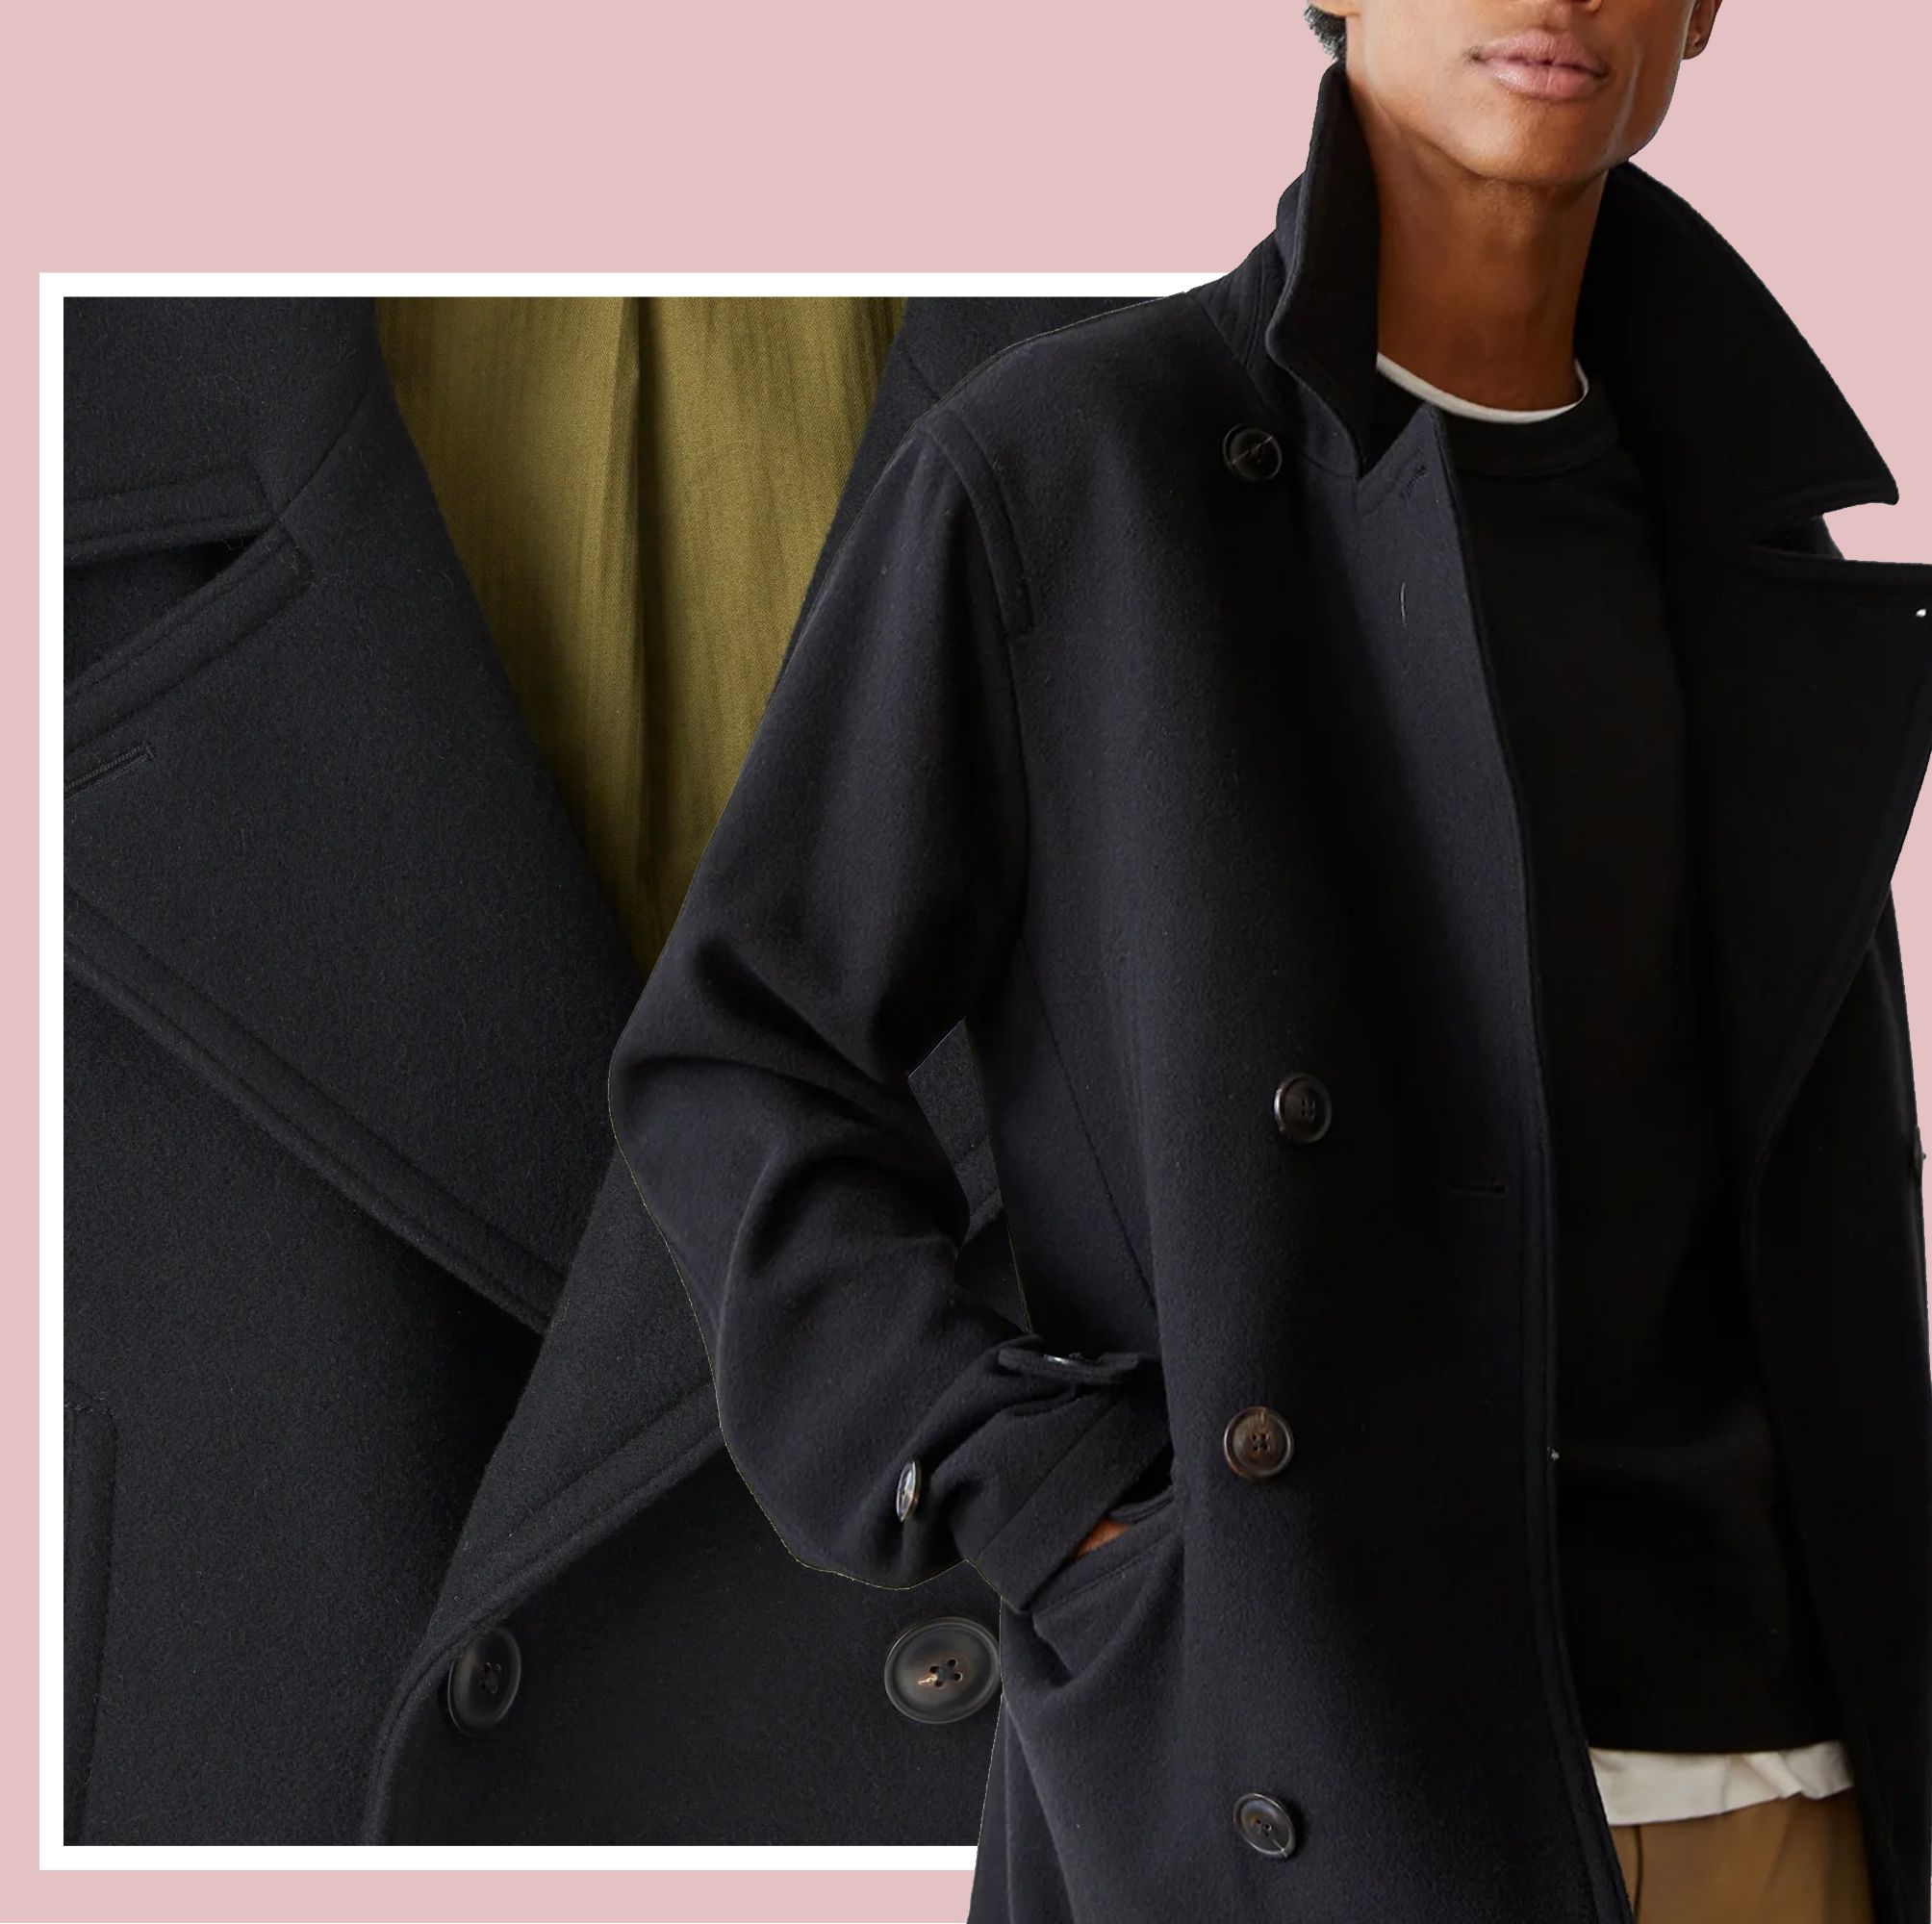 These Peacoats Will Make You Look Like the Leading Man of Your Own Movie